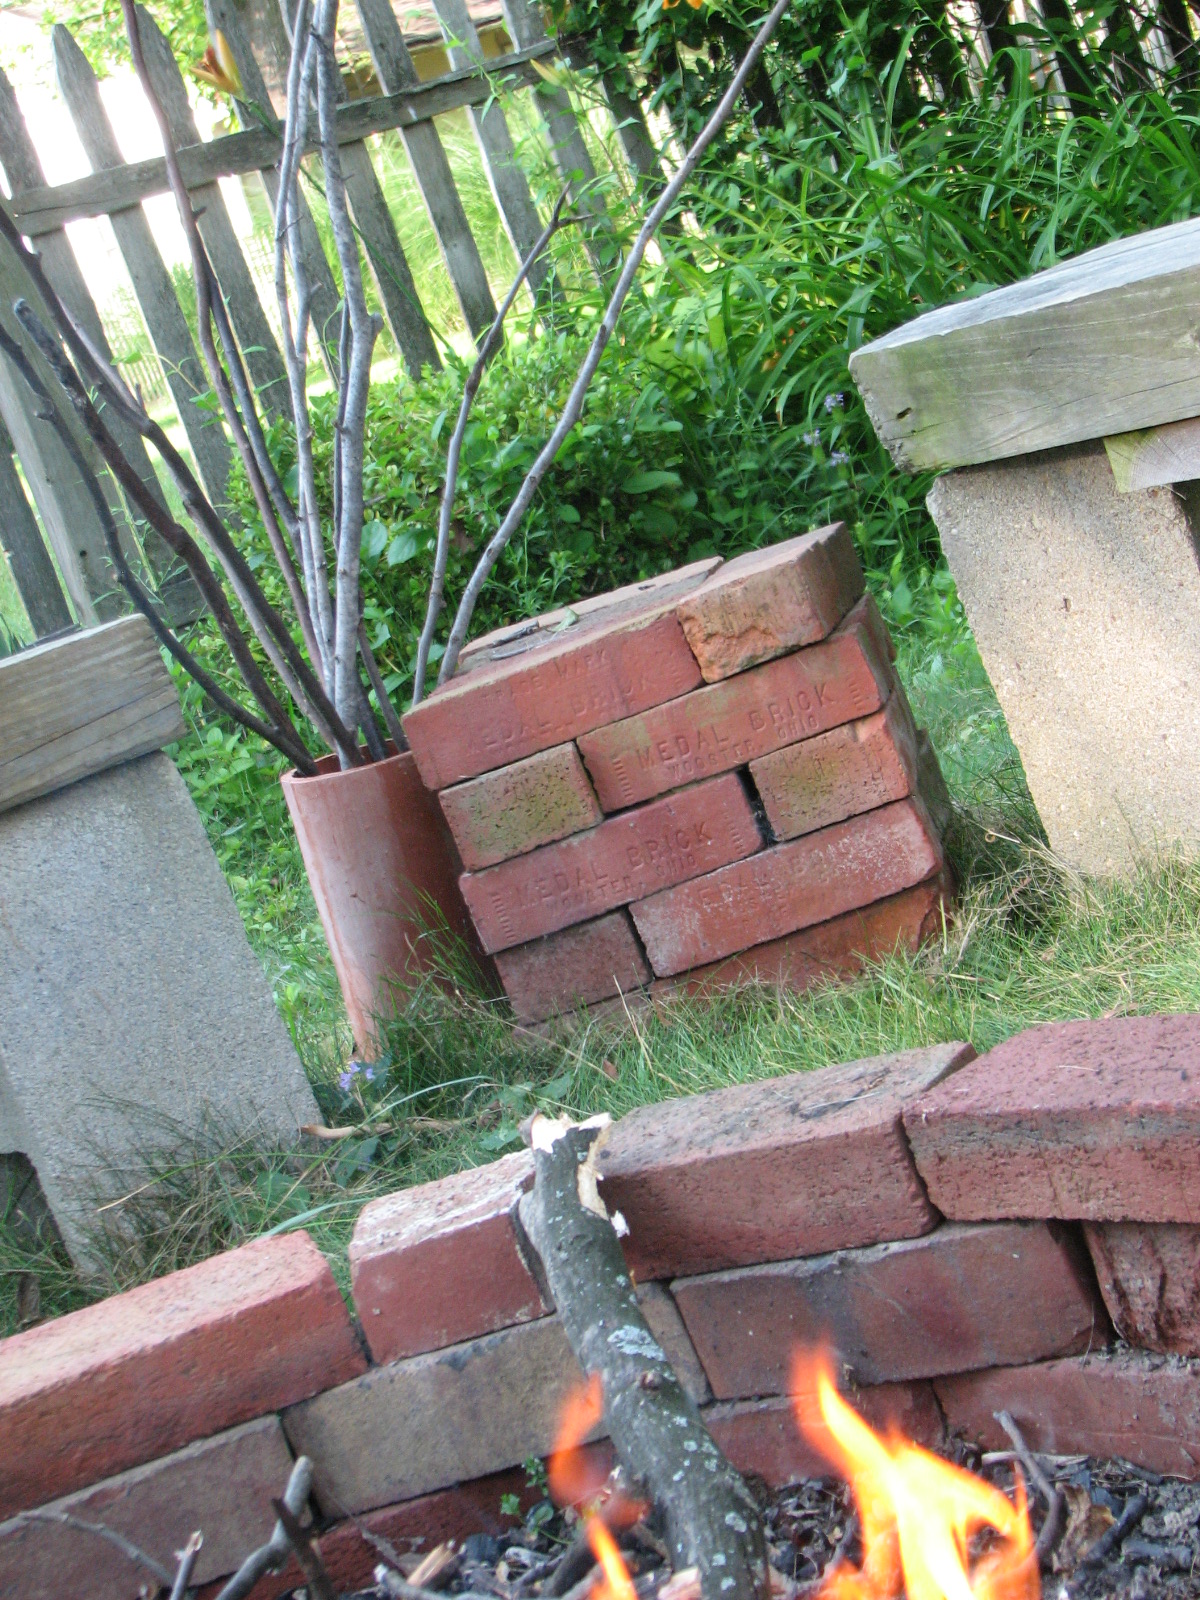 Budget Fire Pit From Reclaimed Brick, How To Make A Square Fire Pit Out Of Bricks